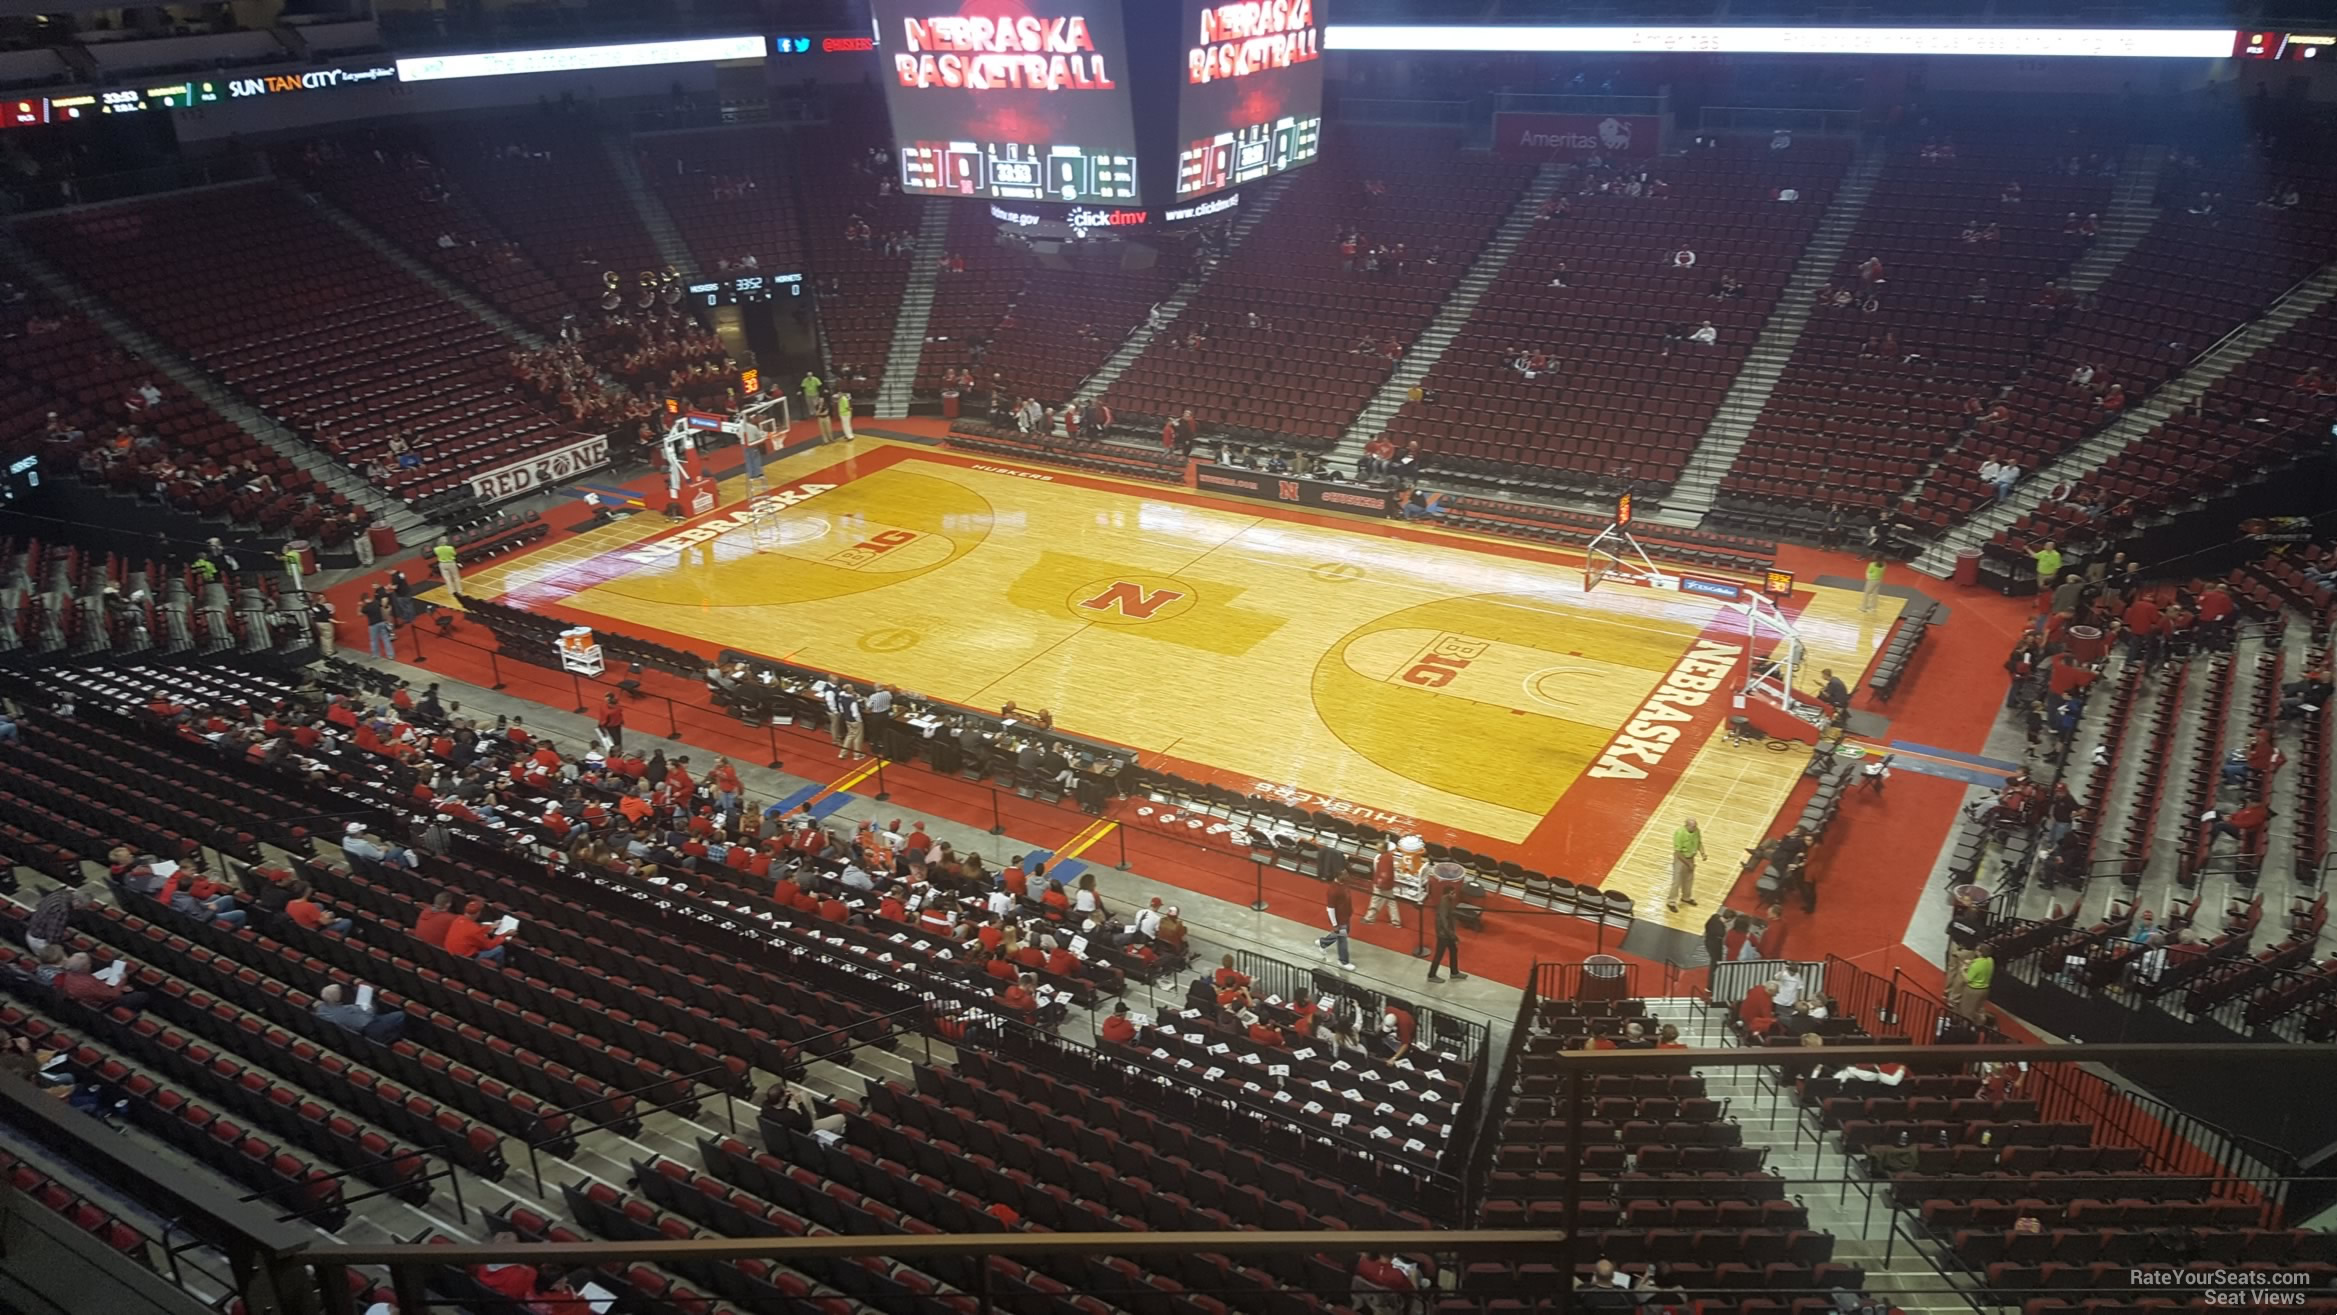 section 202, row 3 seat view  for basketball - pinnacle bank arena